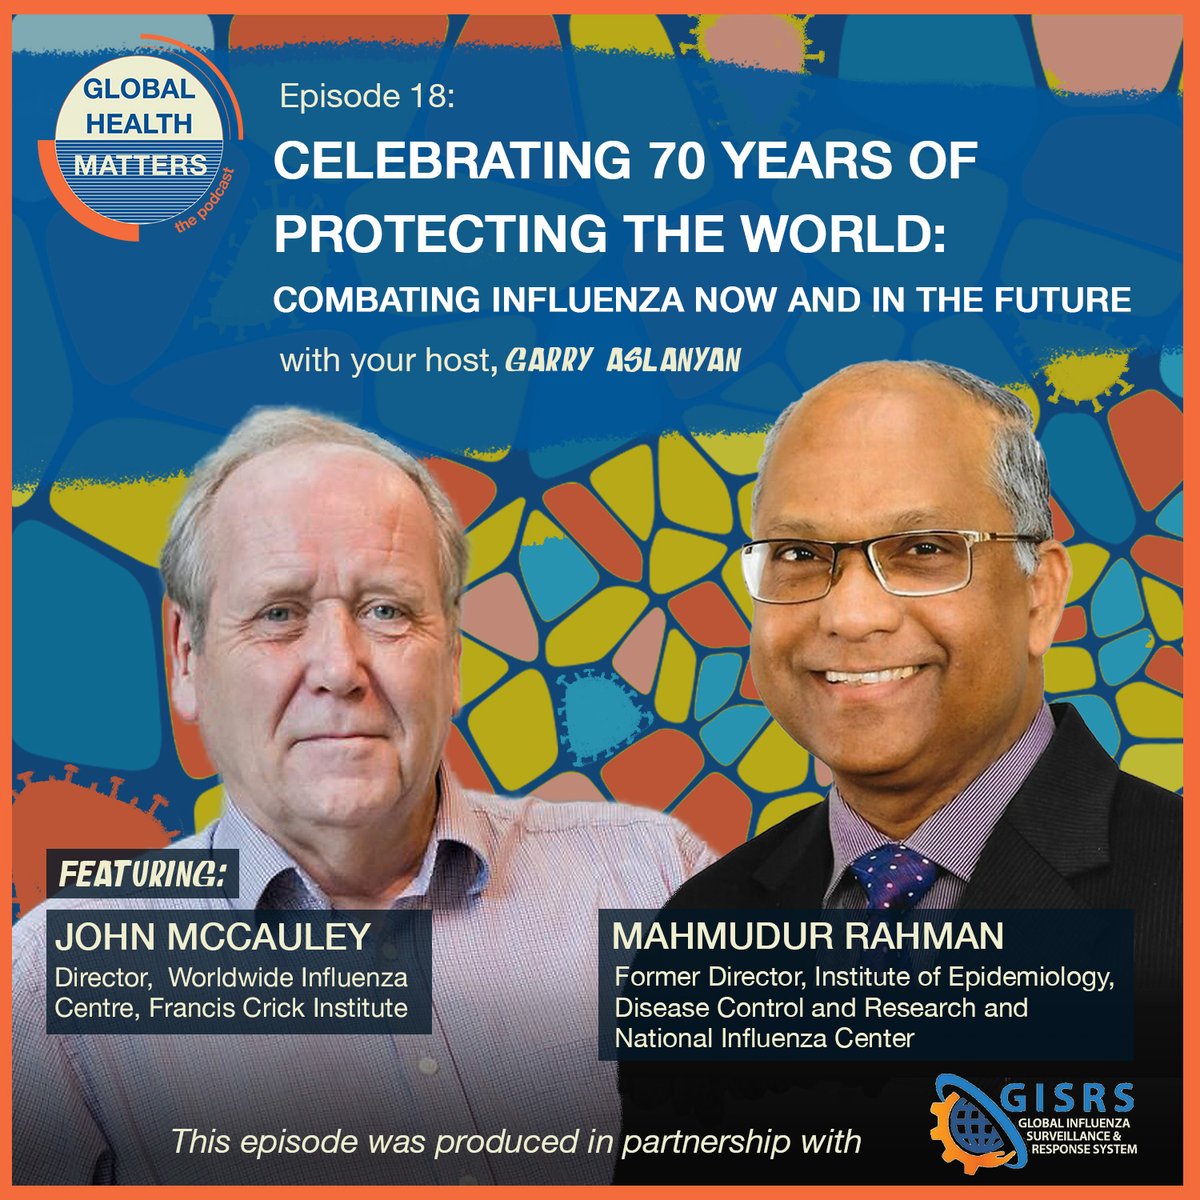 For this episode of the #GlobalHealthMatters 🎙️podcast, we’ve partnered with #GISRS to learn more about how this global network has protected the world against influenza for 70 years. Hear more as @GarryAslanyan speaks to John McCauley & Mahmudur Rahman👉bit.ly/3D7NOH6